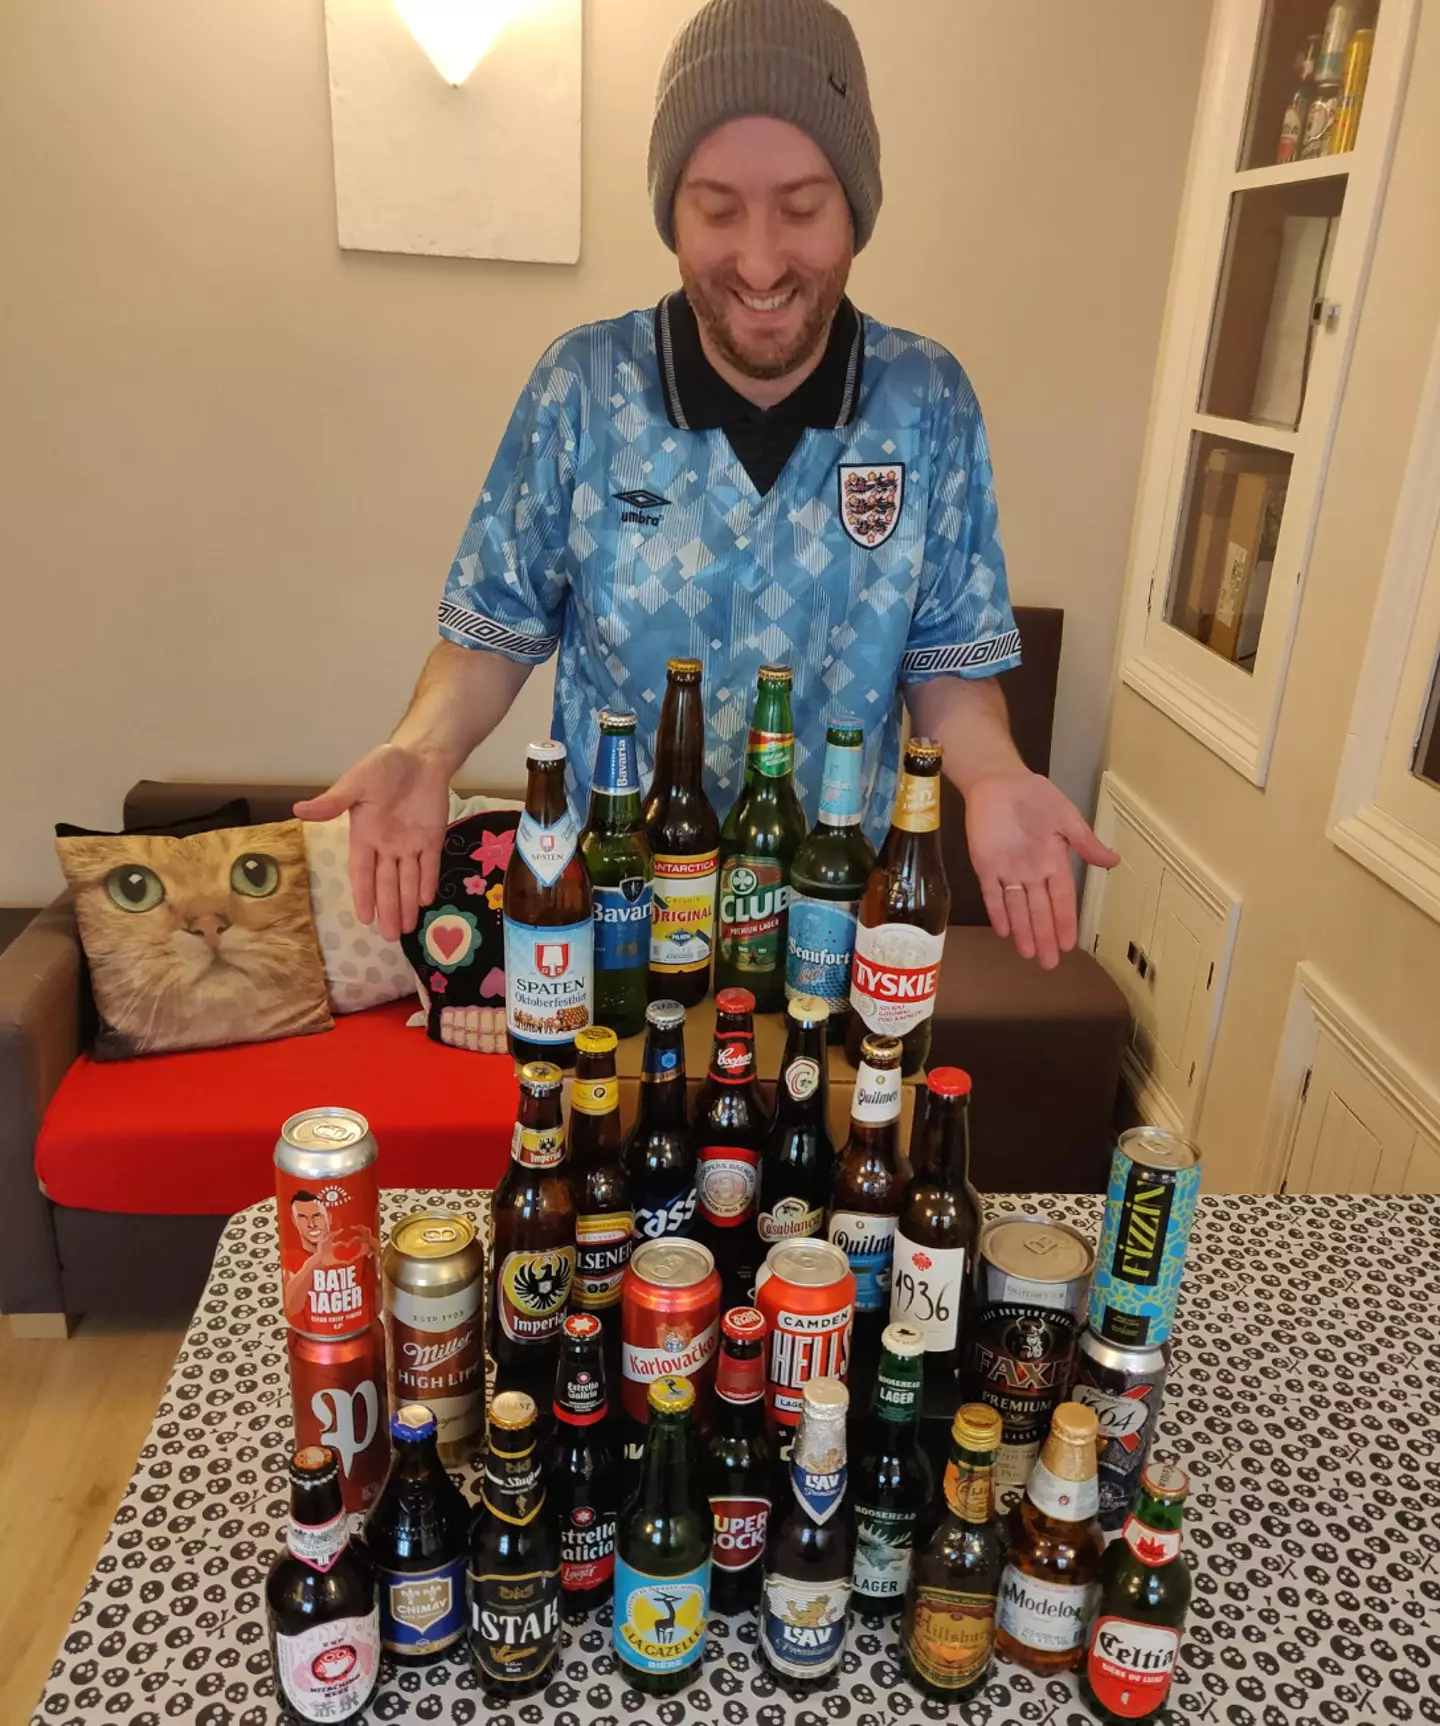 Gus has collected a total of 32 beers from across the globe.